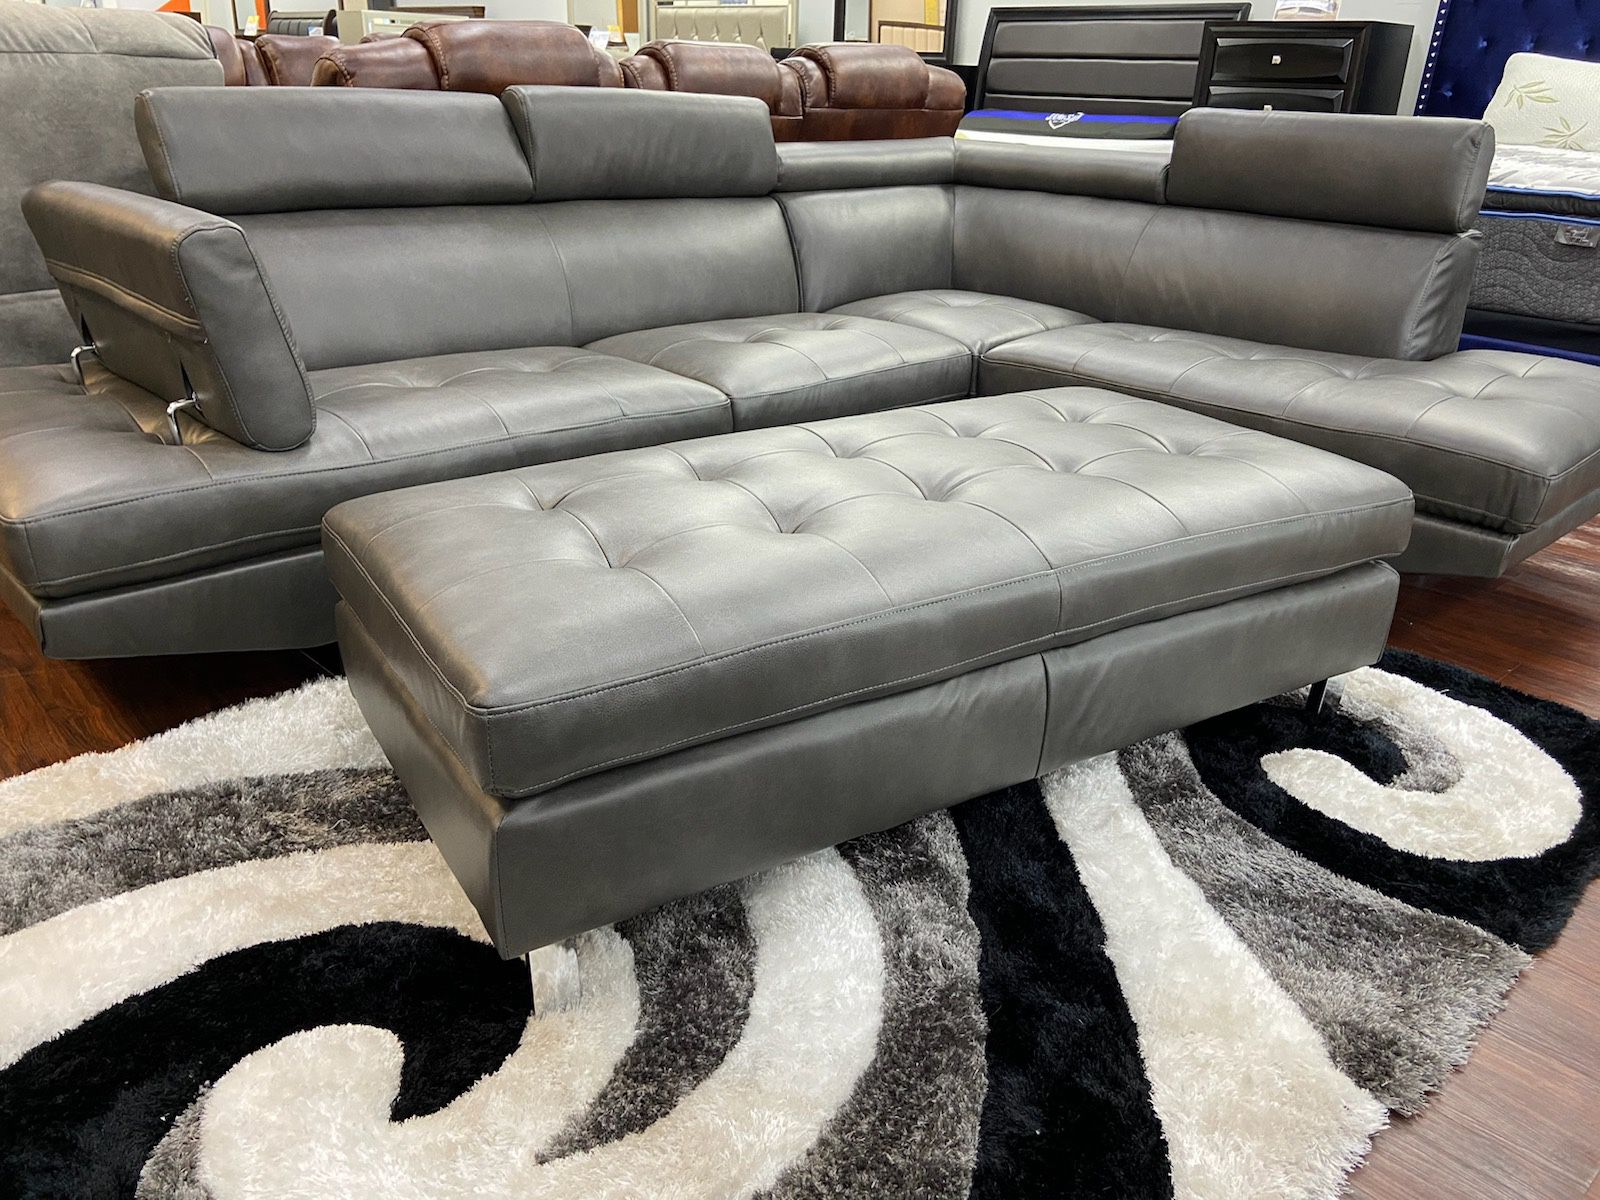 BEAUTIFUL IBIZA SECTIONAL SOFA!$699!*SAME DAY DELIVERY*NO CREDIT NEEDED*EASY FINANCING*HUGE SALE*